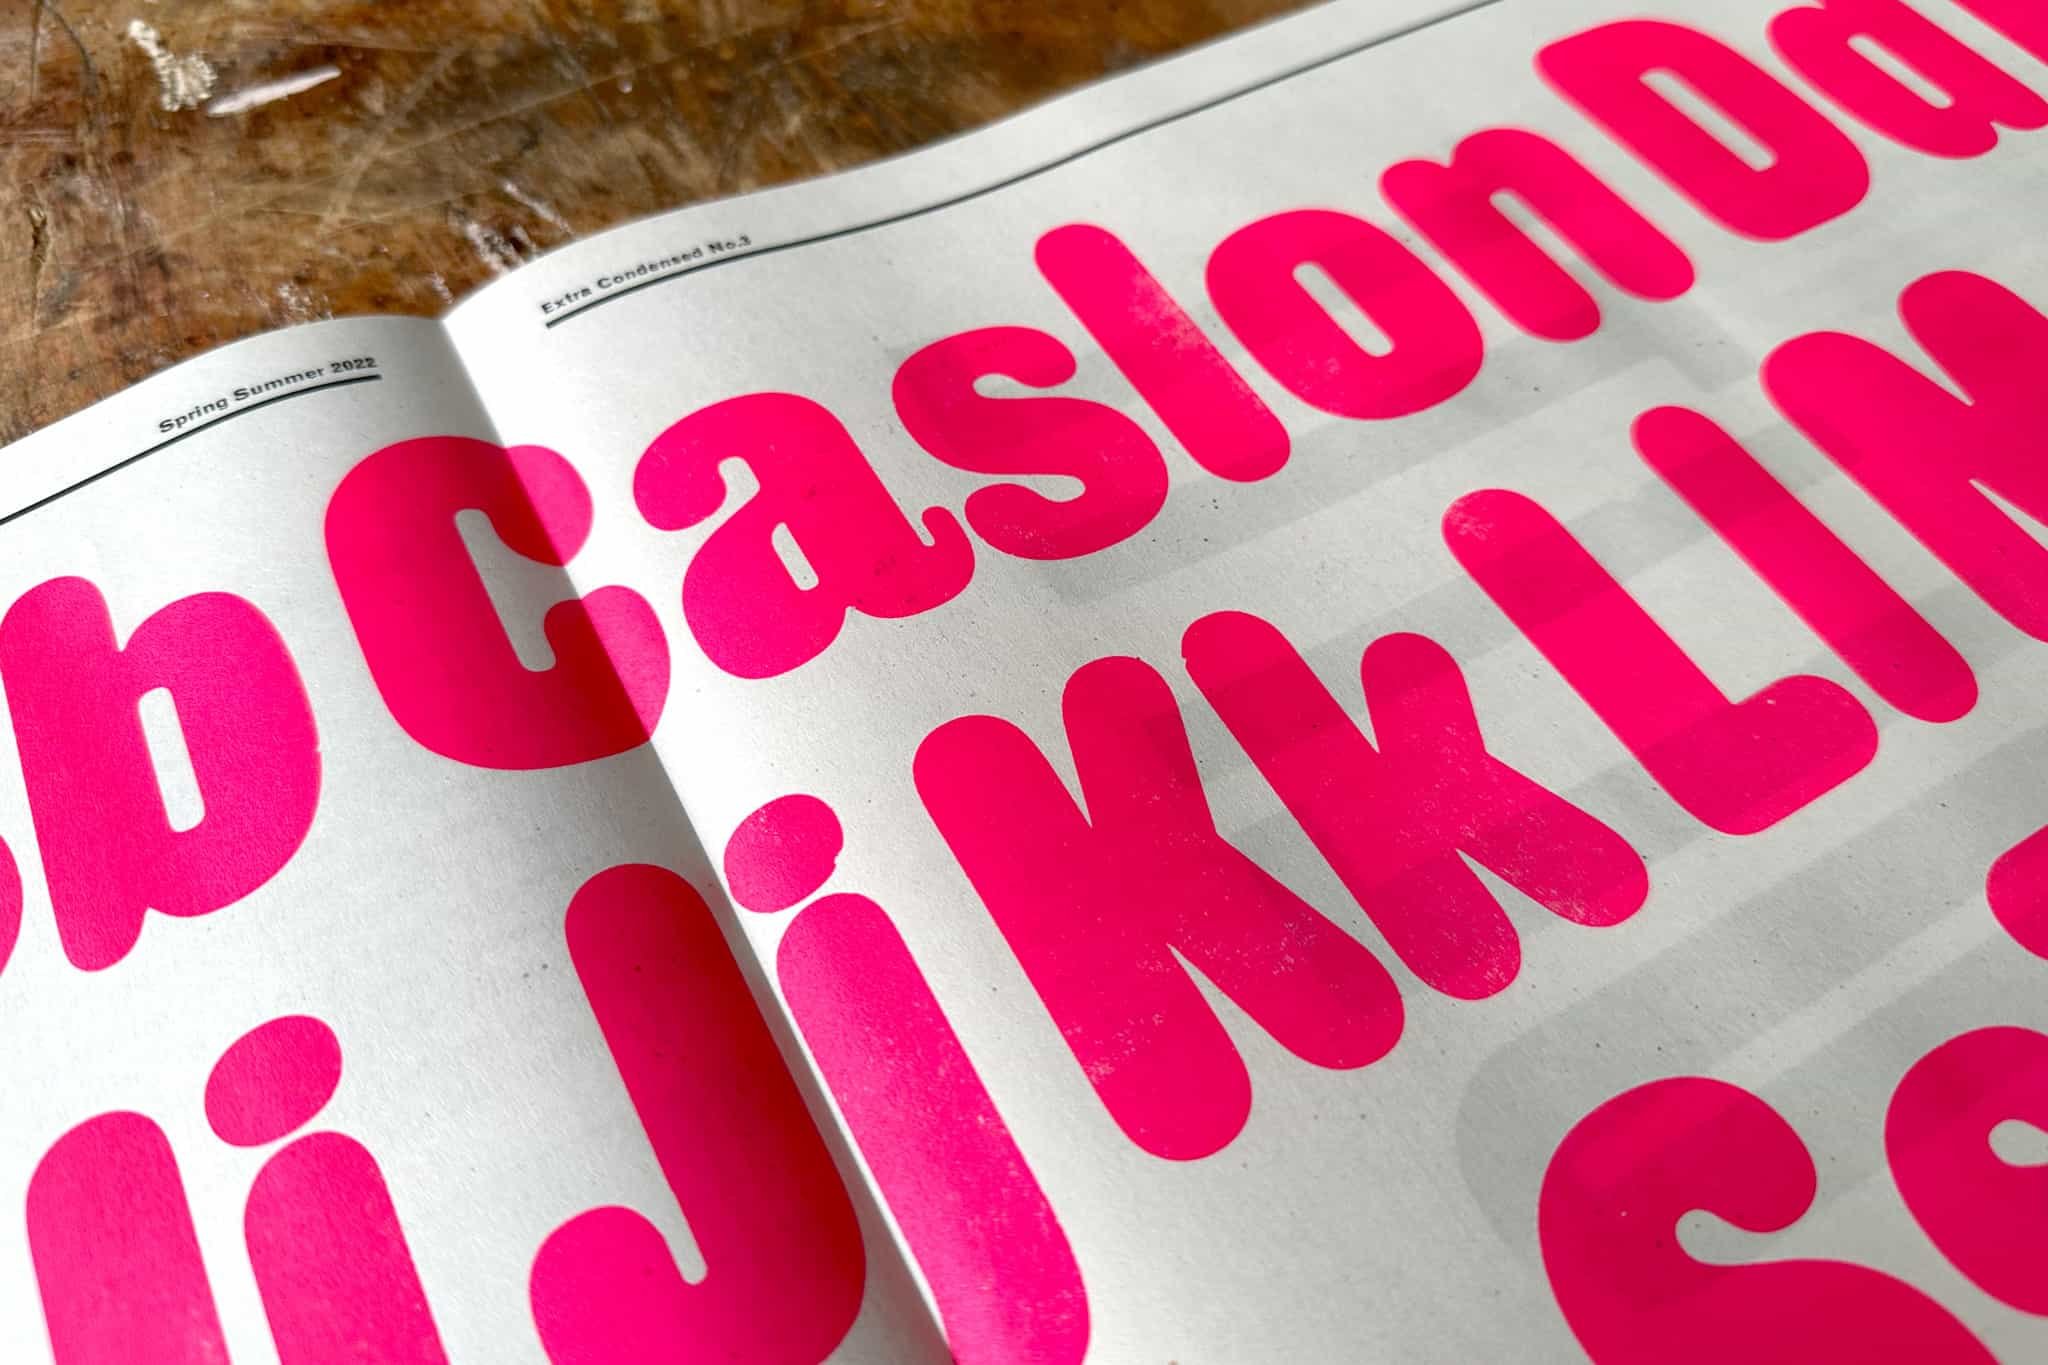  Paul Barnes writes about creating Caslon Rounded 